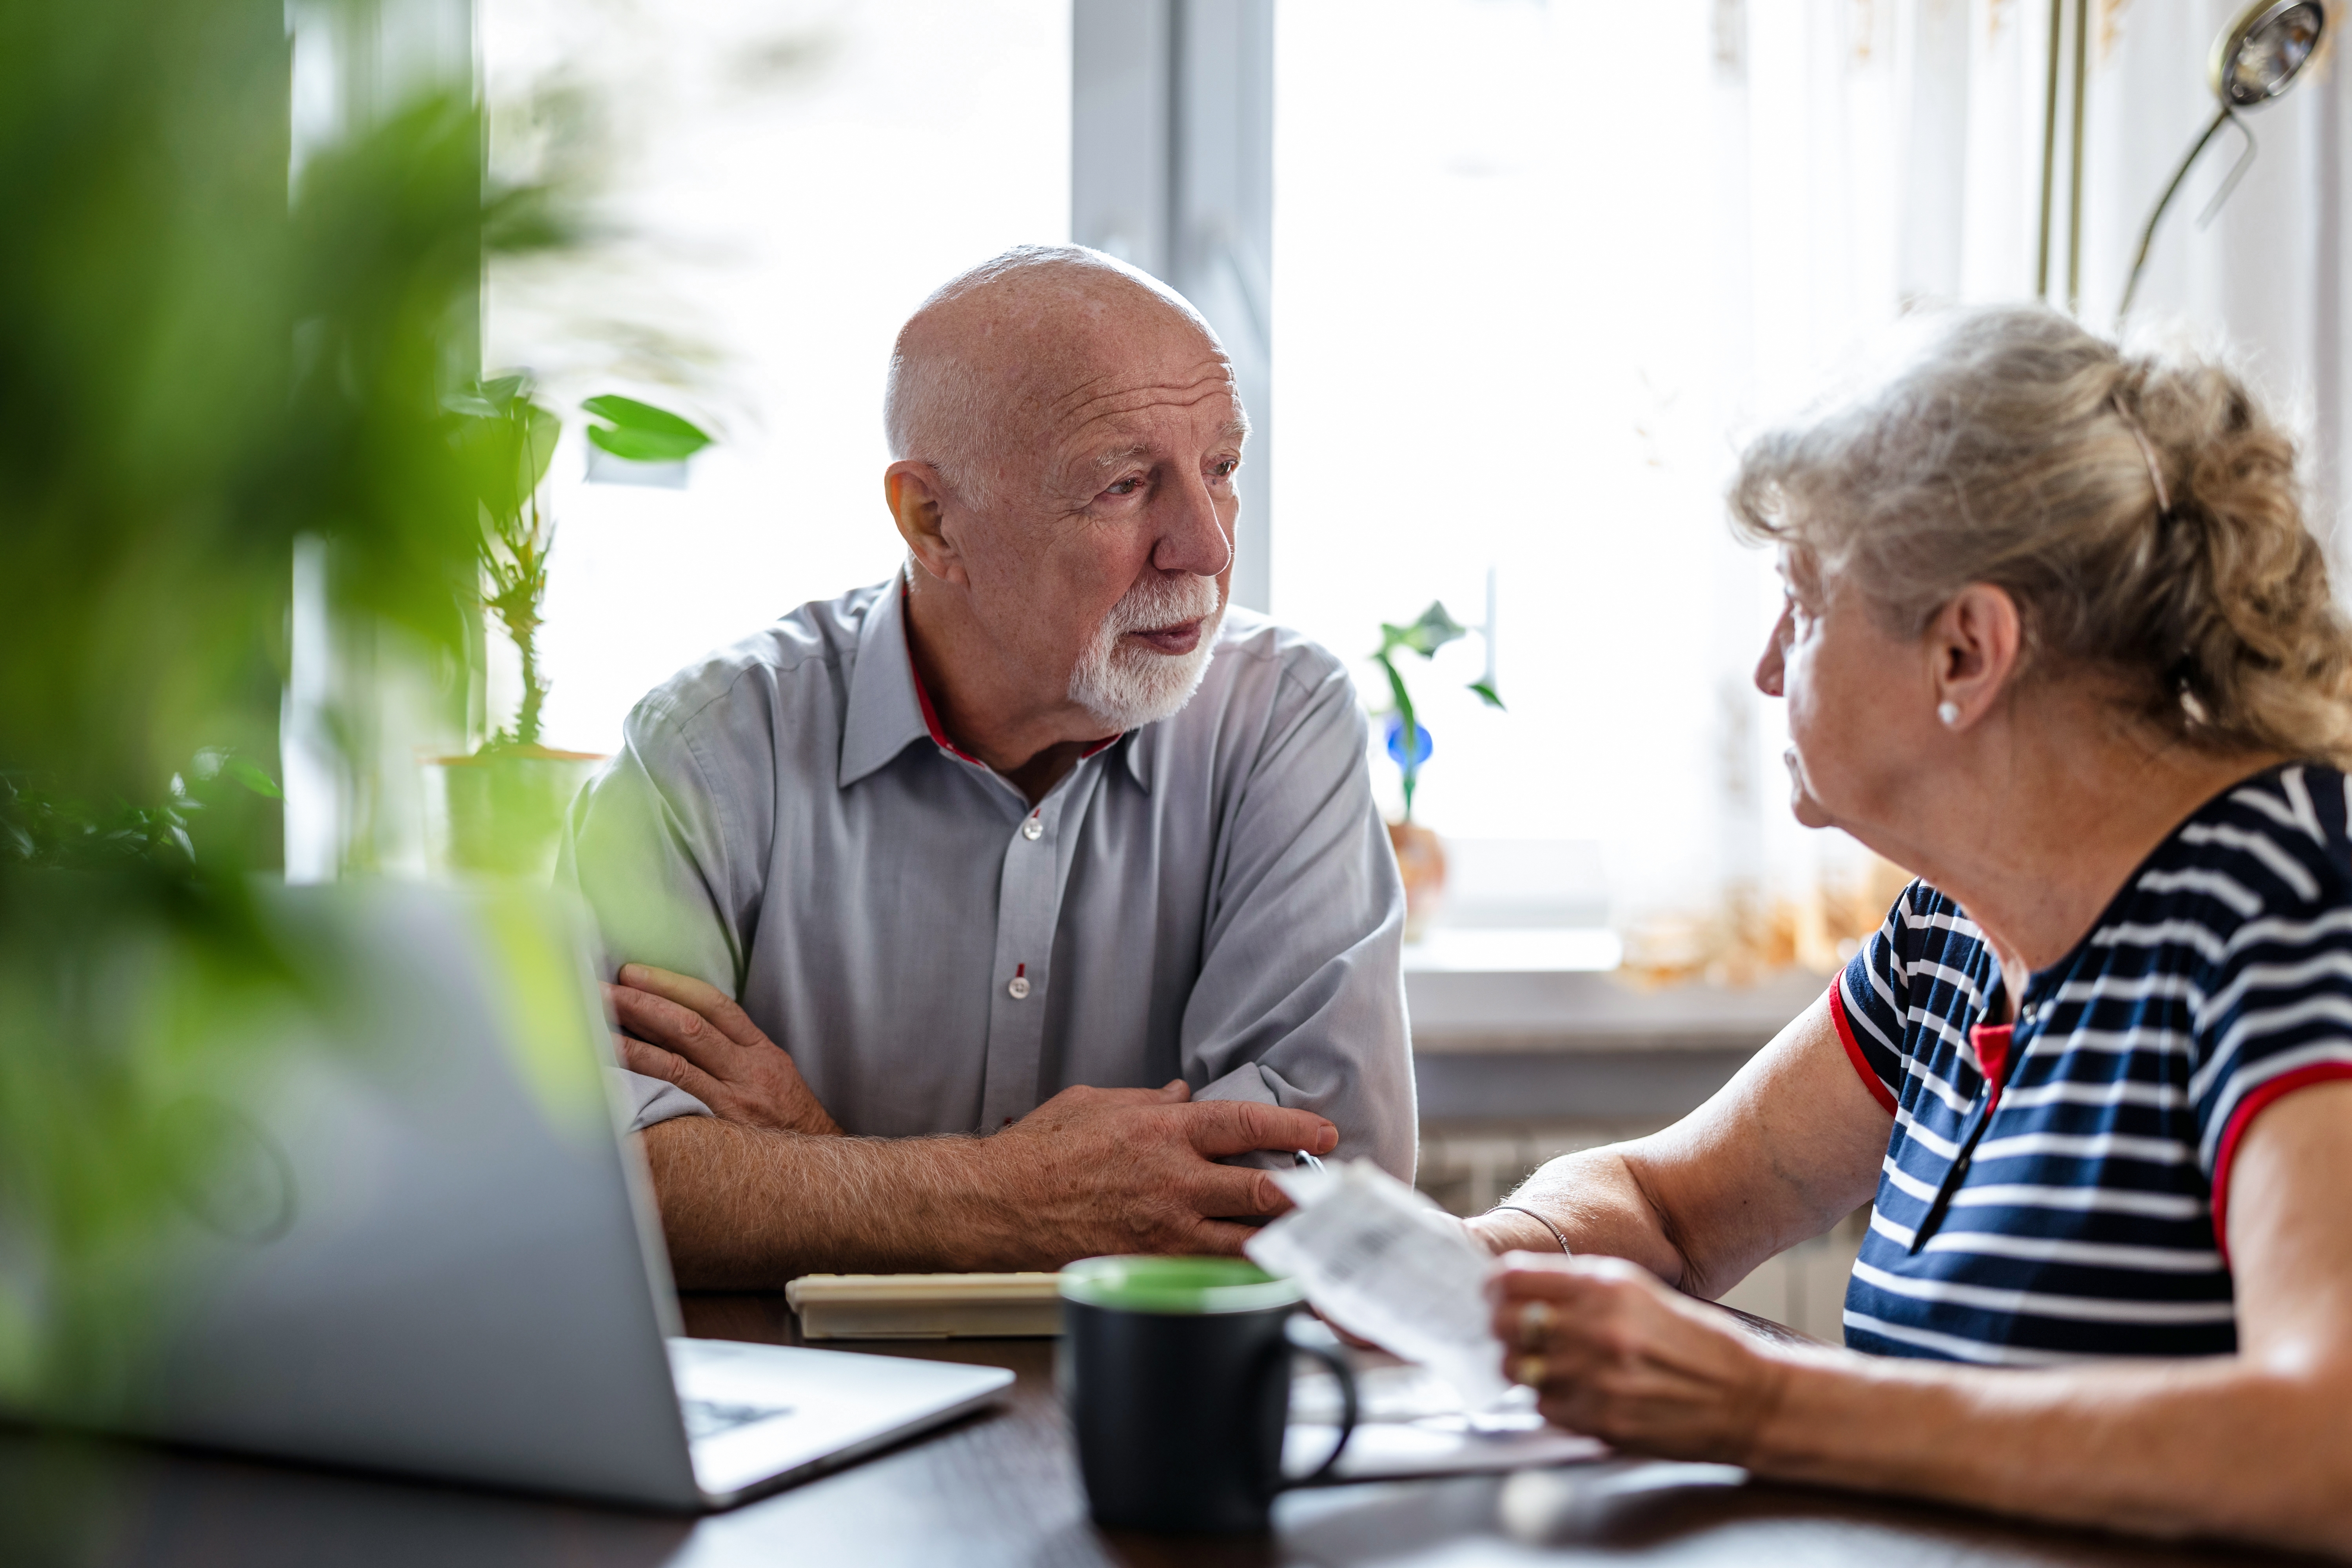 An elderly couple having a discussion | Source: Shutterstock